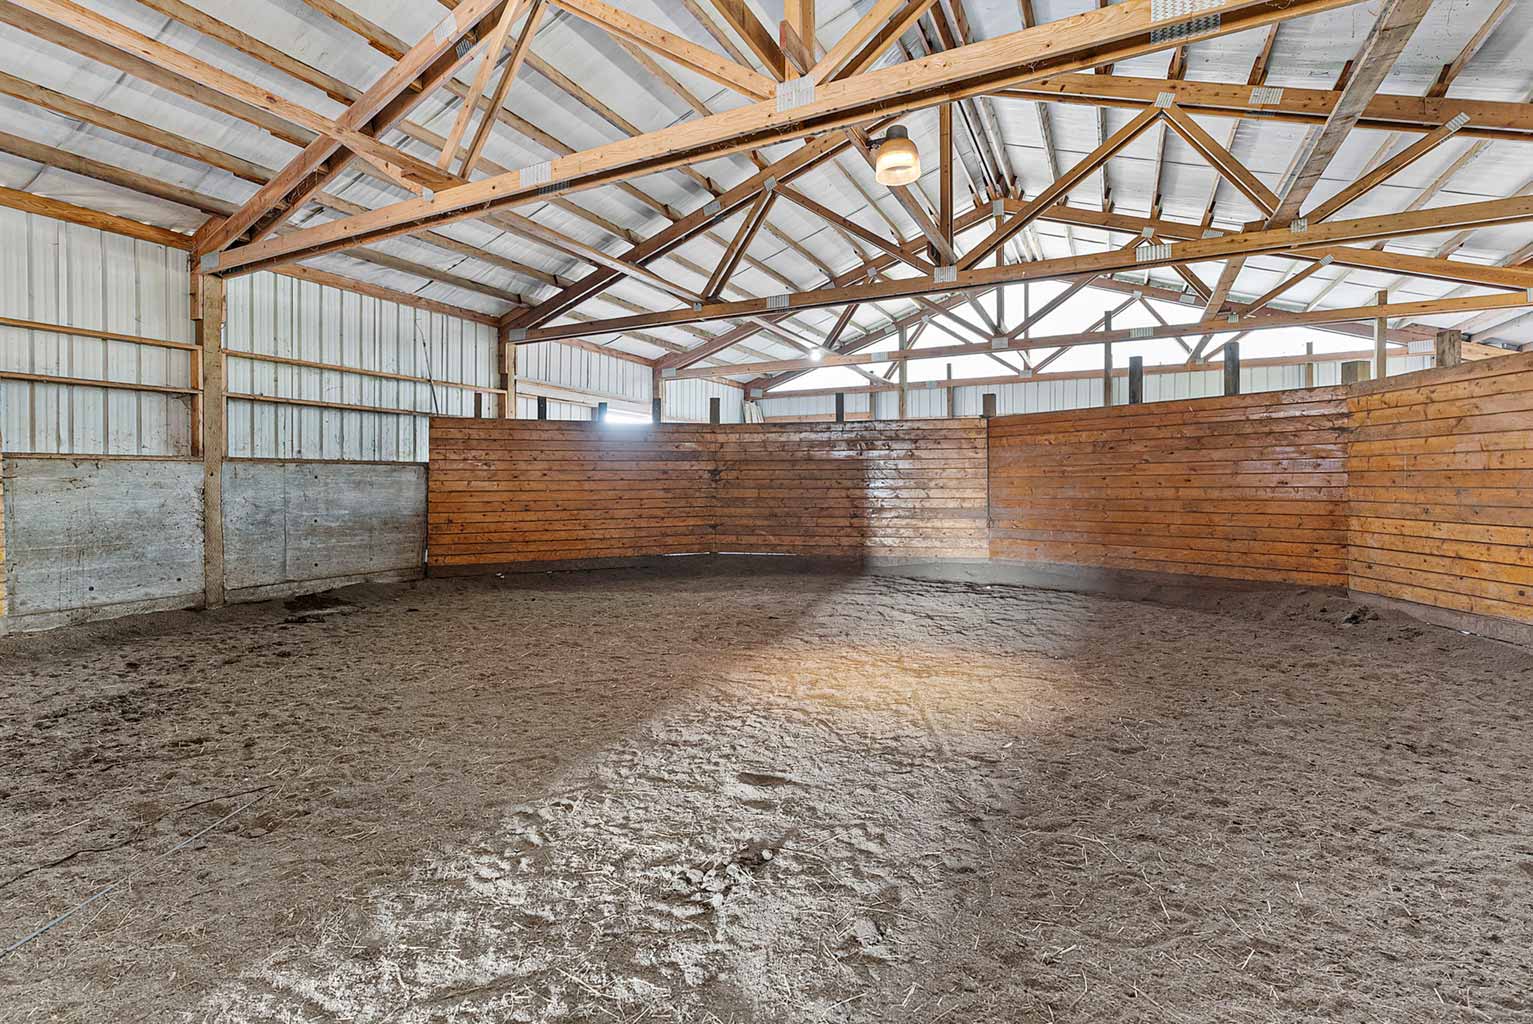 Smaller barn includes a 60' covered round pen with viewing platform